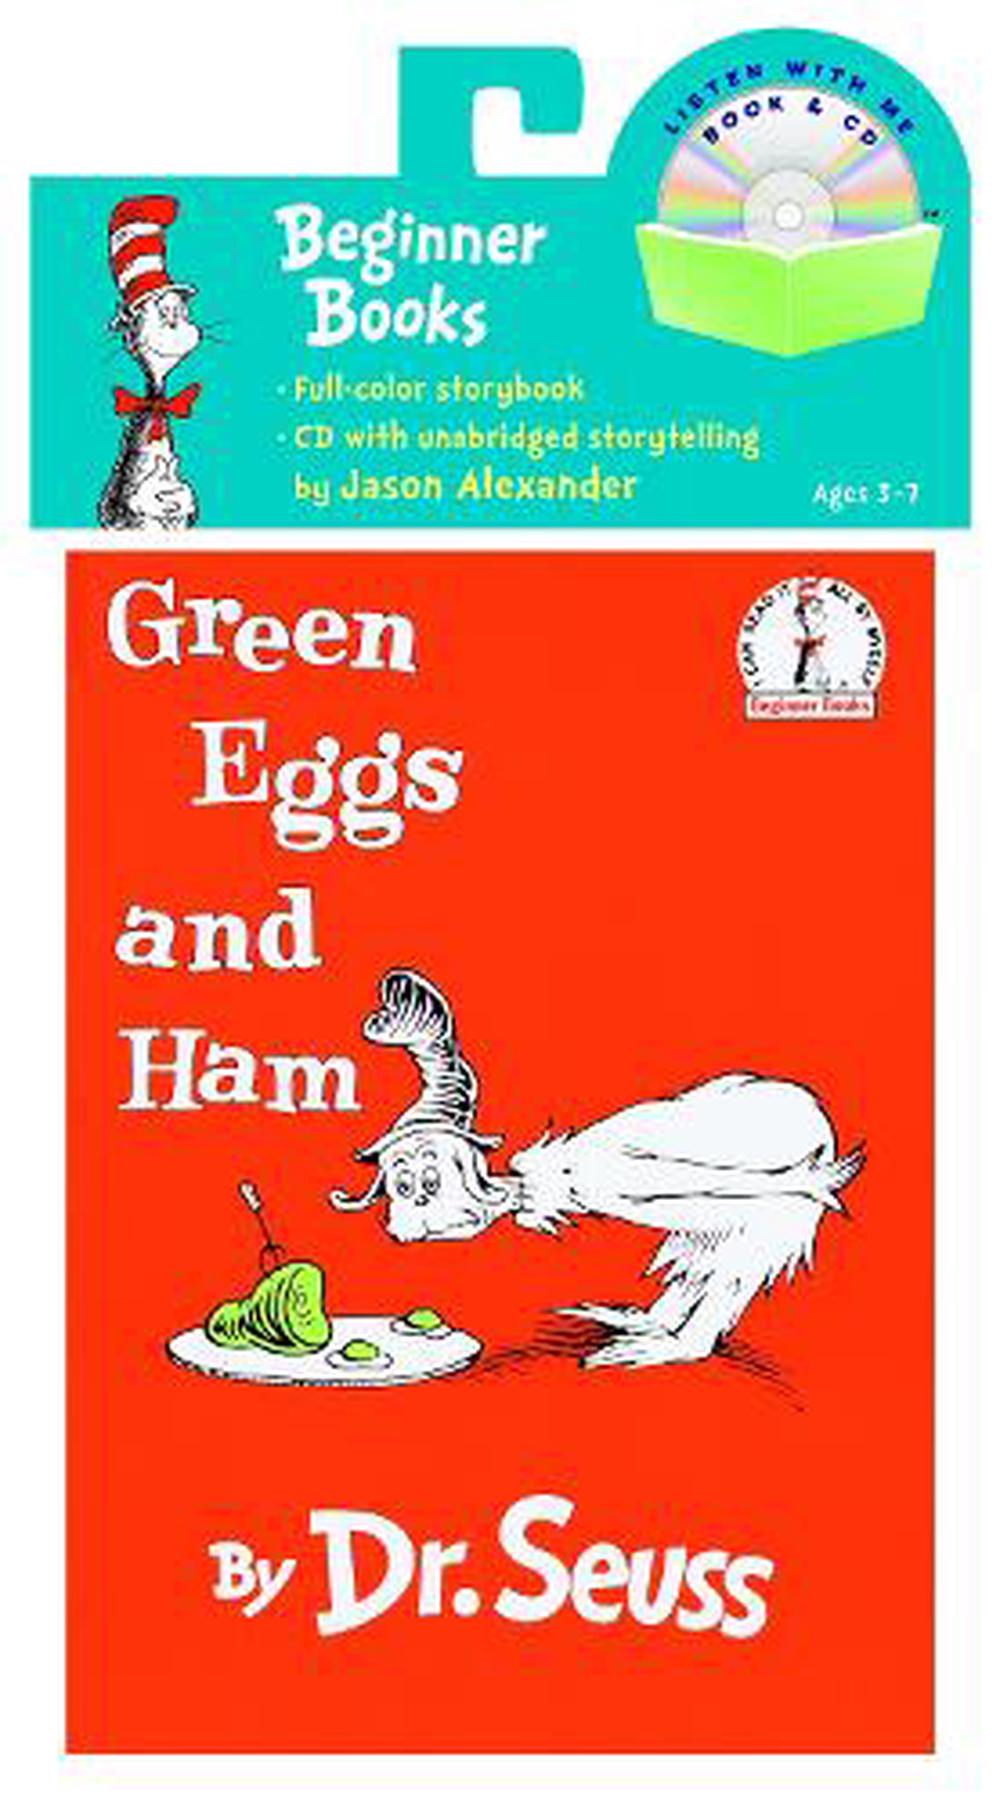 Green Eggs and Ham [With CD] by Dr Seuss (English) Paperback Book Free ...